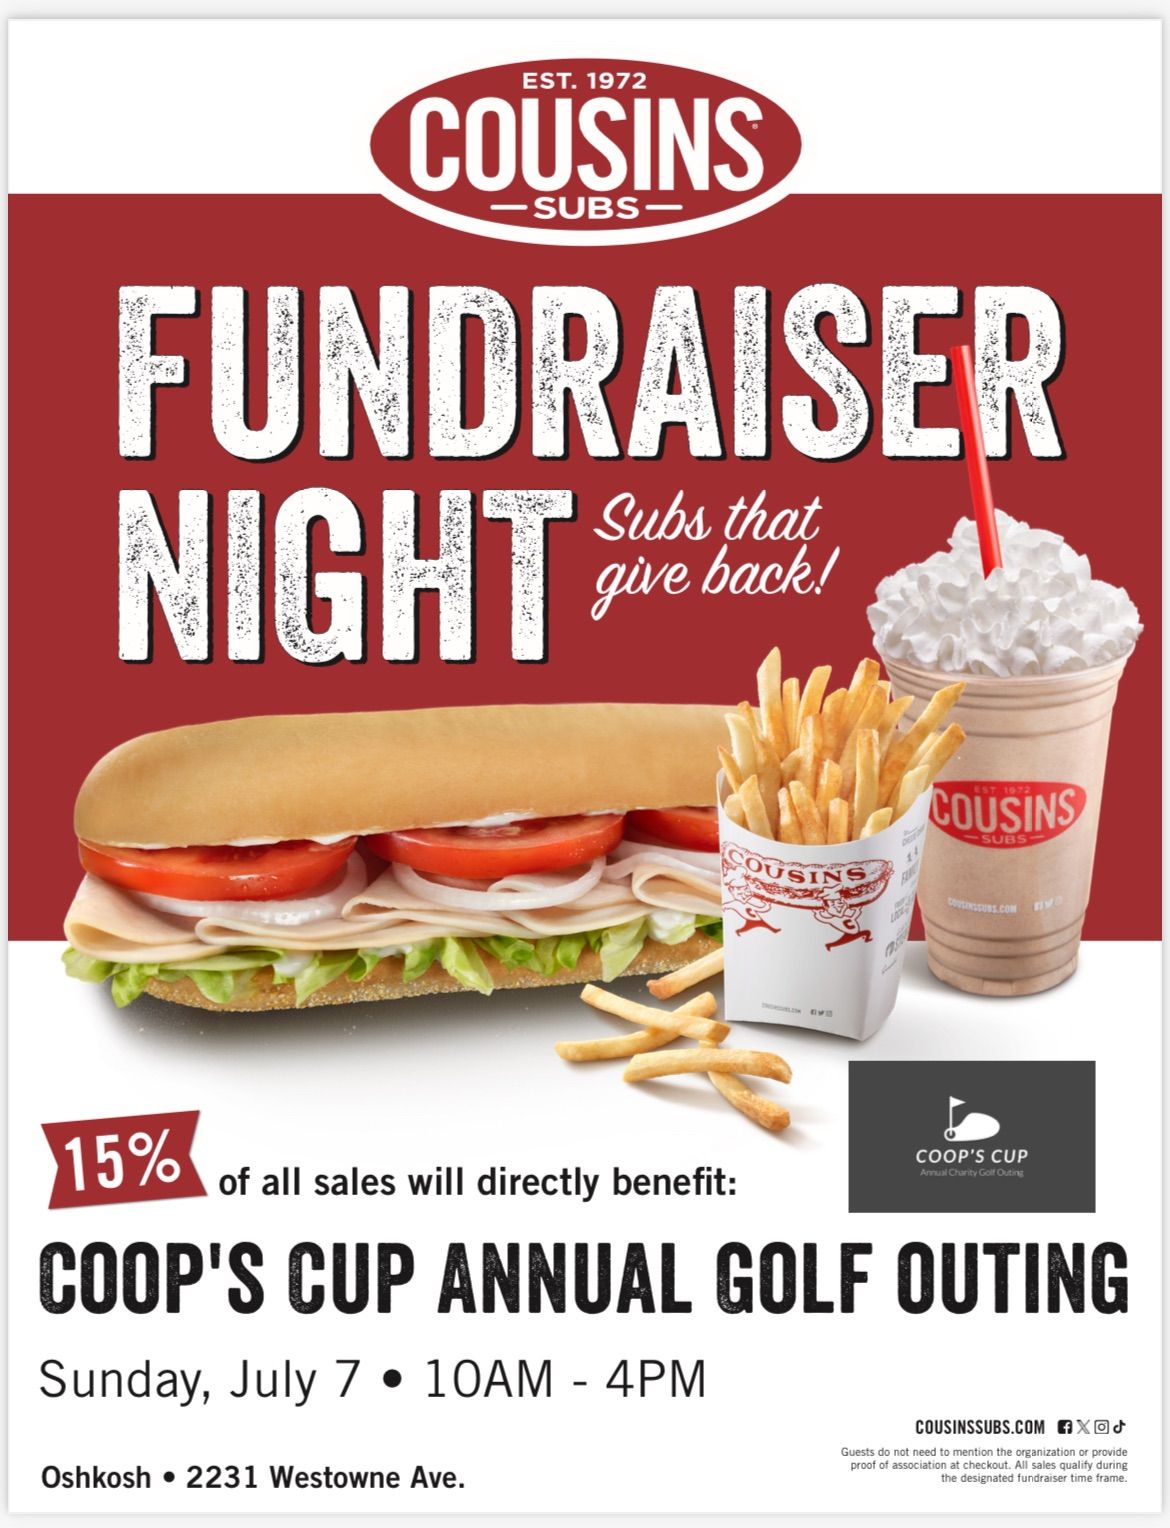 Support Coop's Cup at Cousins Subs